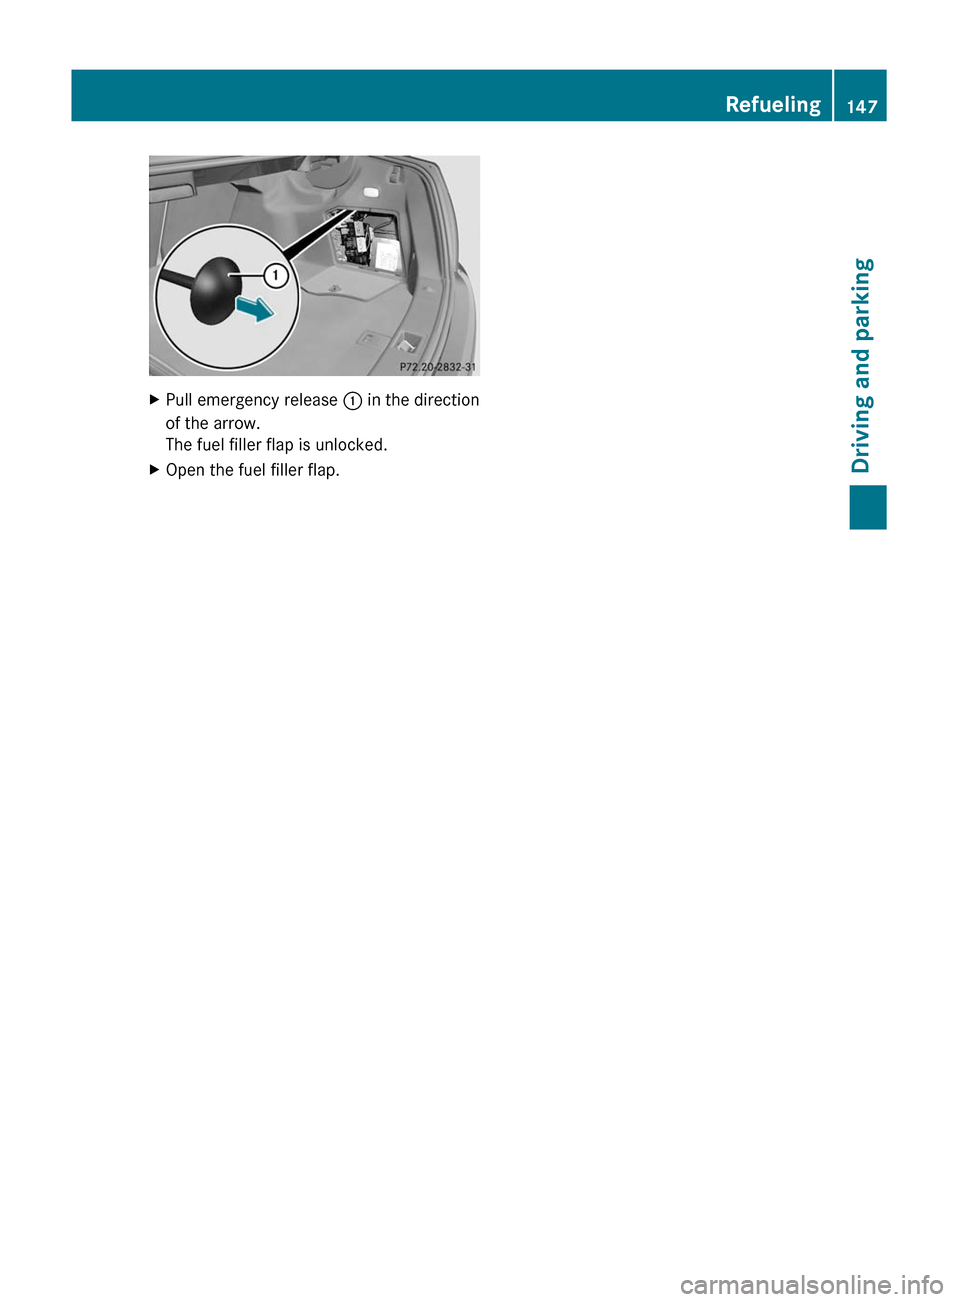 MERCEDES-BENZ C-Class 2011 W204 Owners Guide XPull emergency release : in the direction
of the arrow.
The fuel filler flap is unlocked.
XOpen the fuel filler flap.Refueling147Driving and parkingBA 204 USA, CA Edition A 2011; 1; 5, en-UShereepeVe